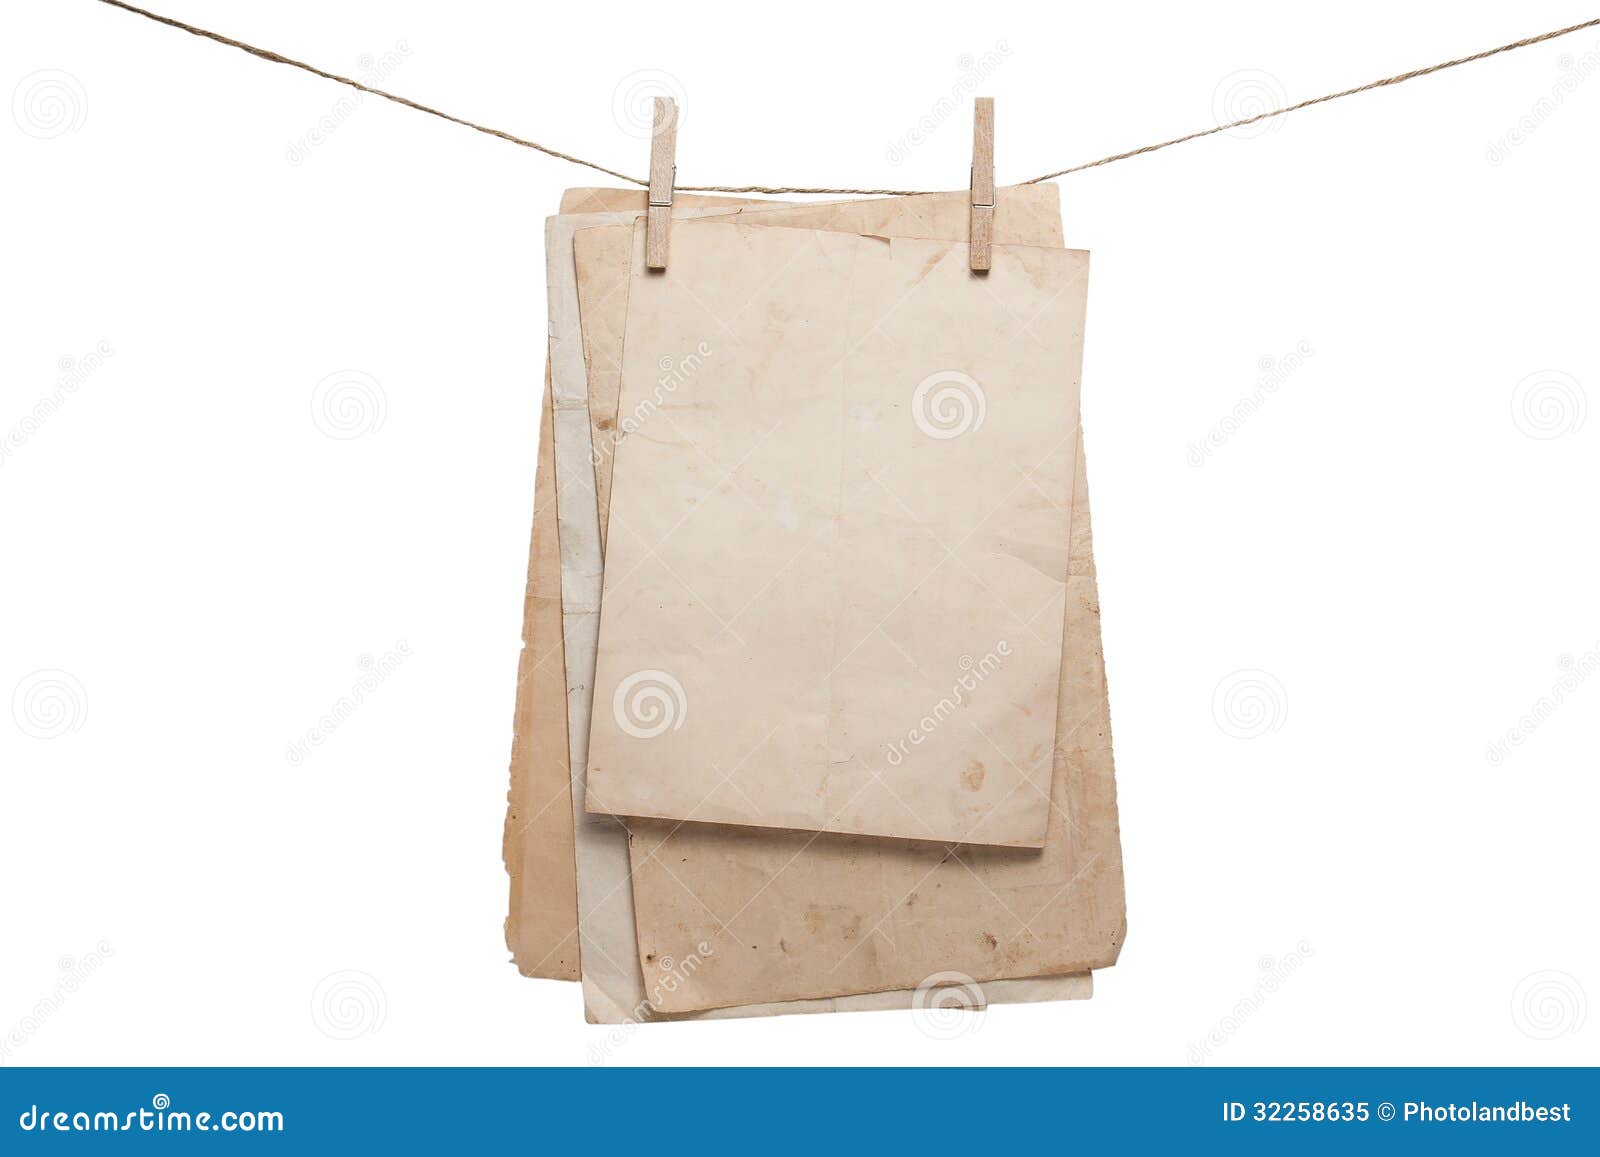 old papers hanging on the rope with clothespins